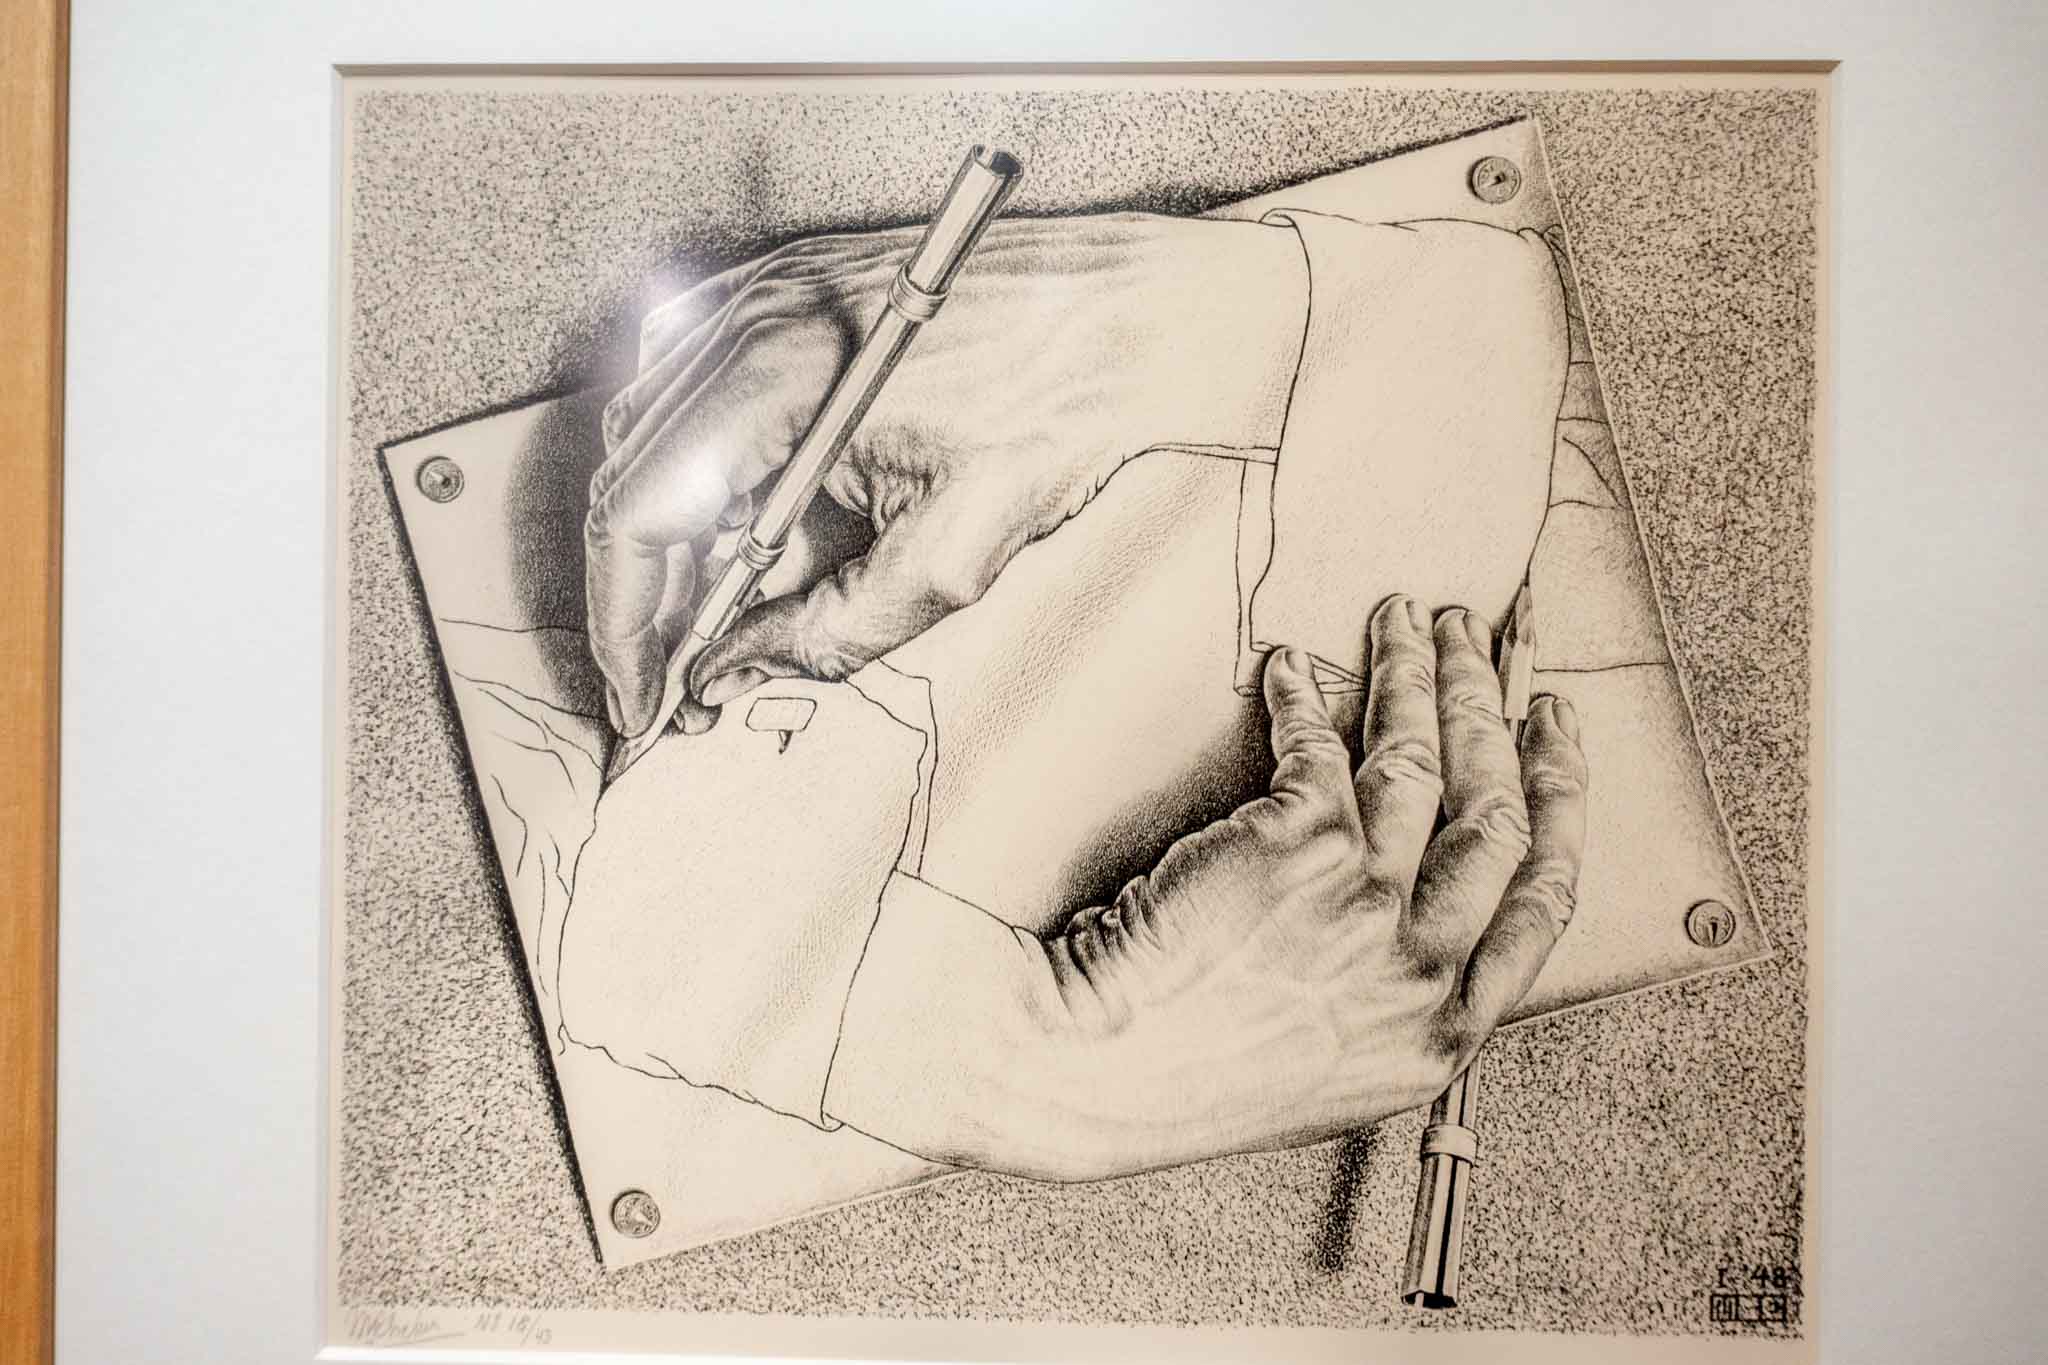 Artwork of two hands drawing each other.